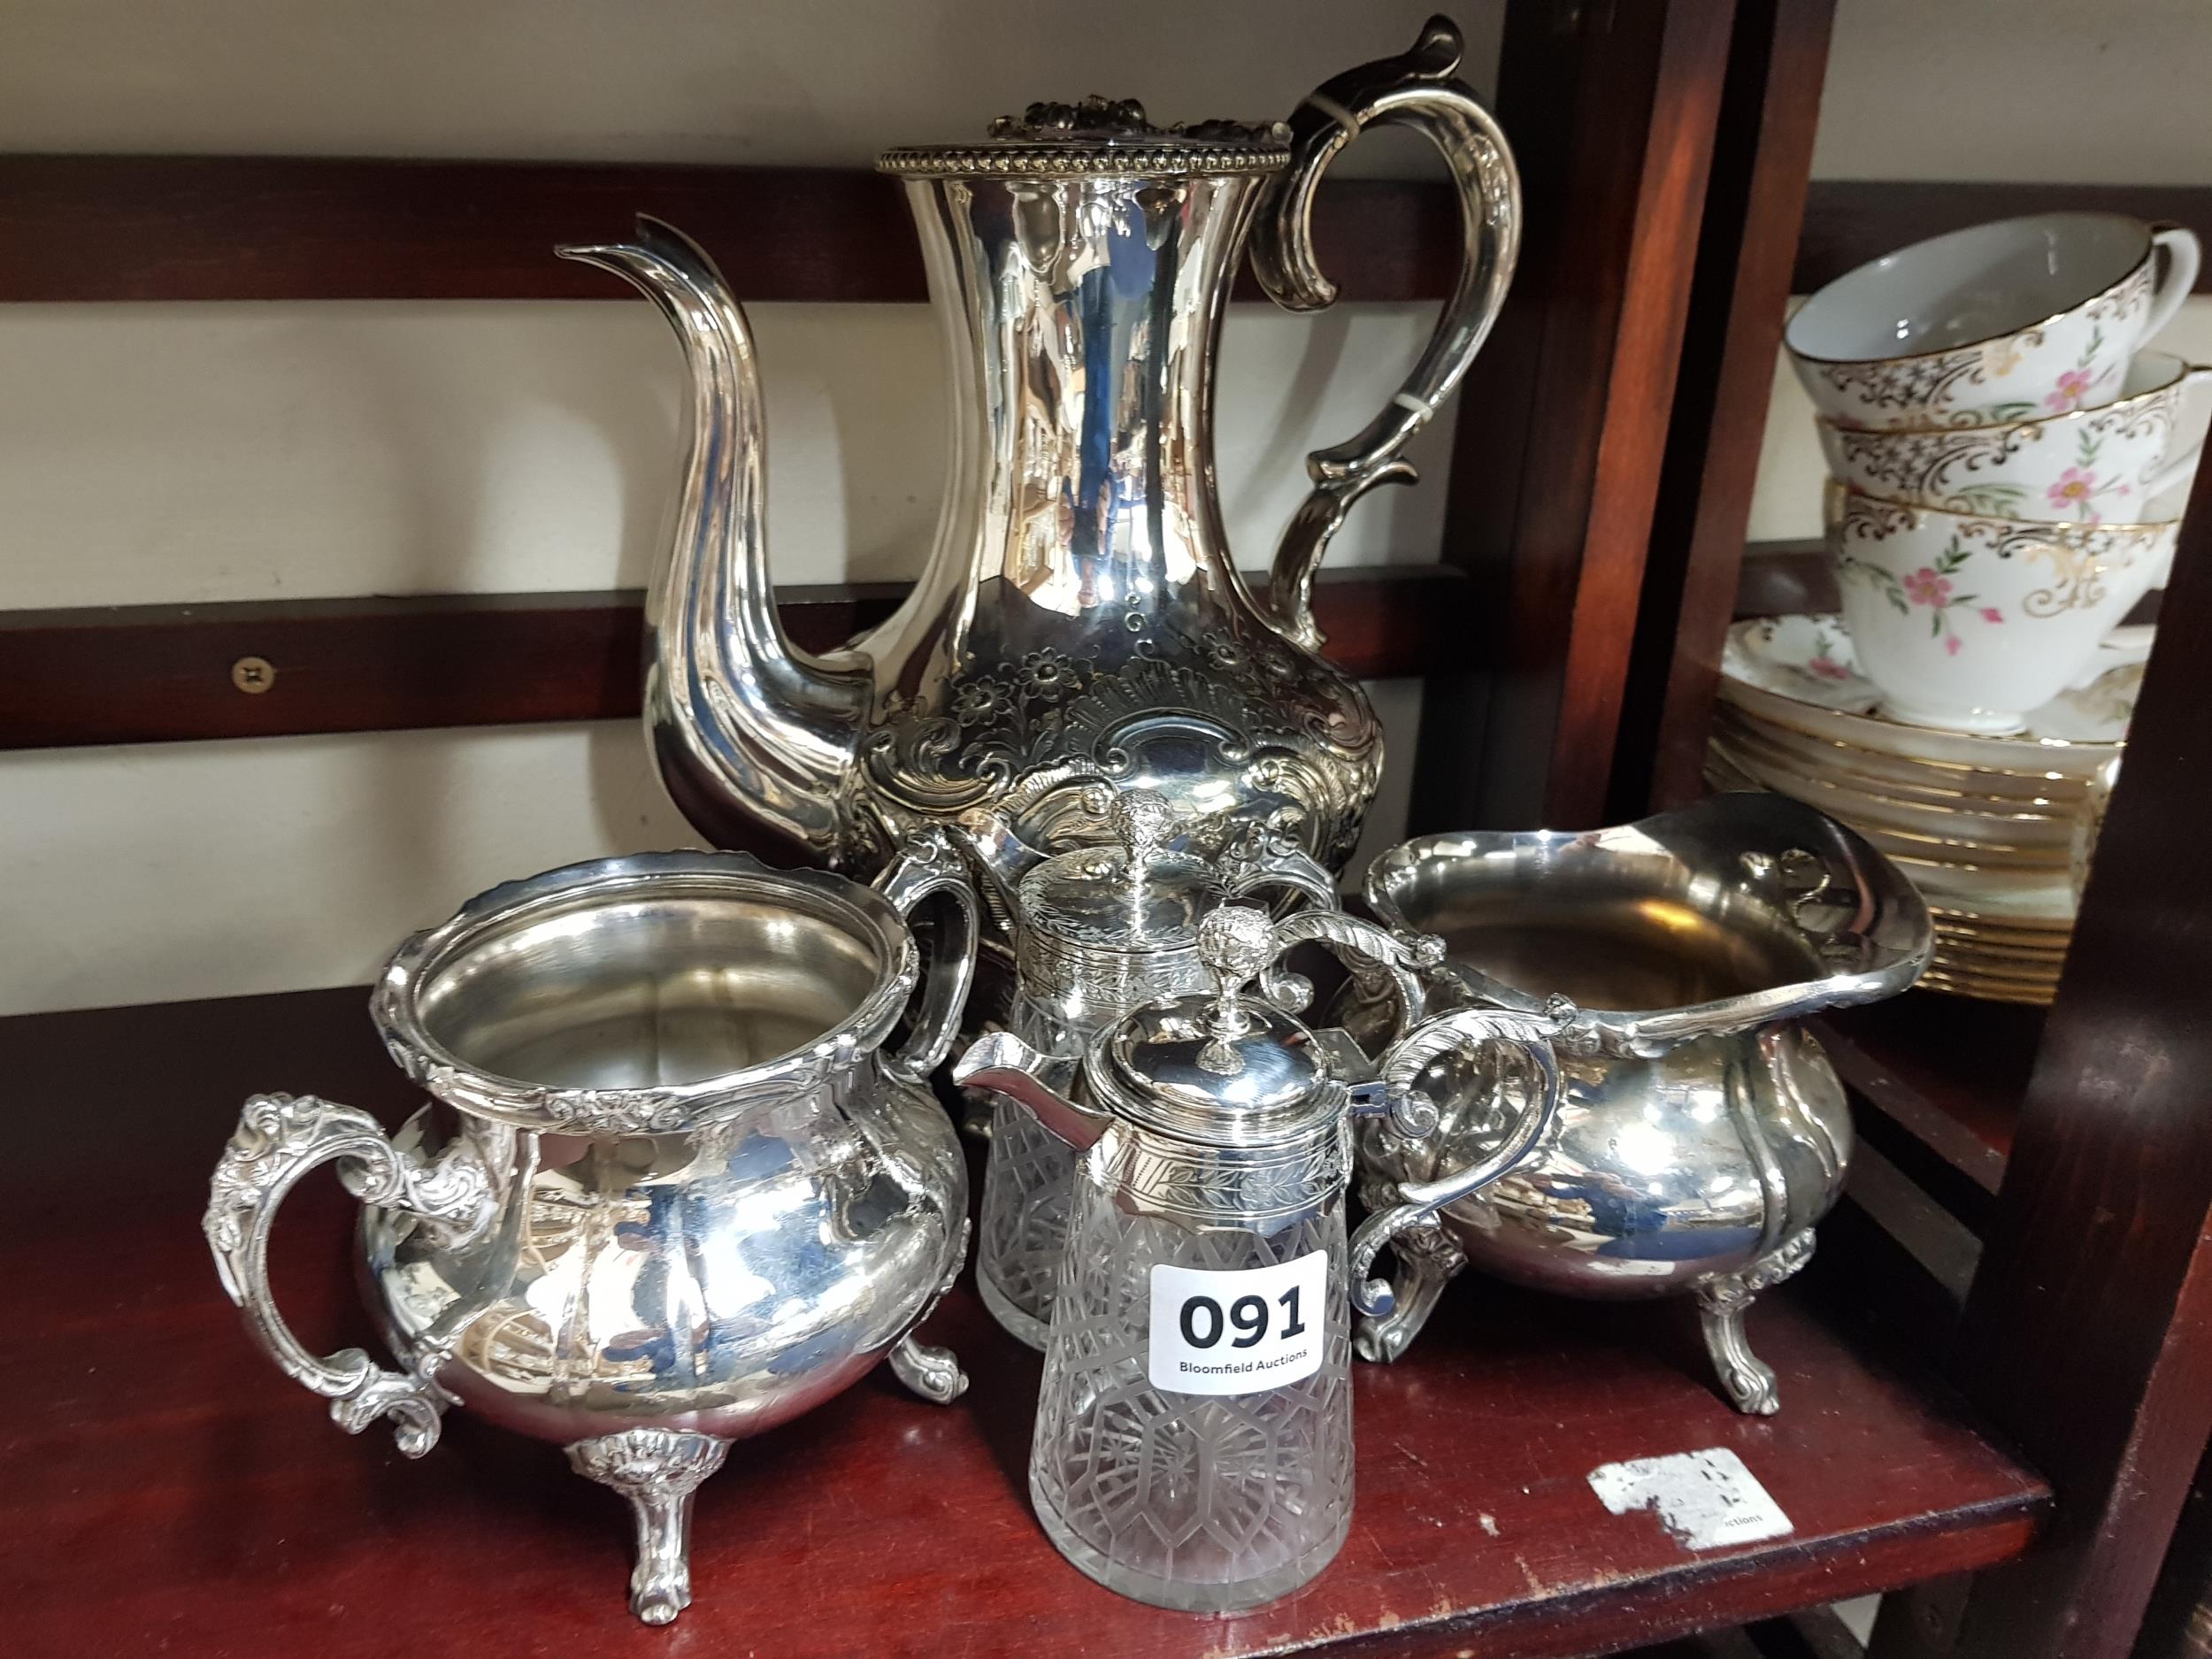 3 PIECE SILVER PLATED TEA SET & PAIR OF EARLY CUT GLASS JUGS WITH SILVER PLATED TOPS & HANDLES